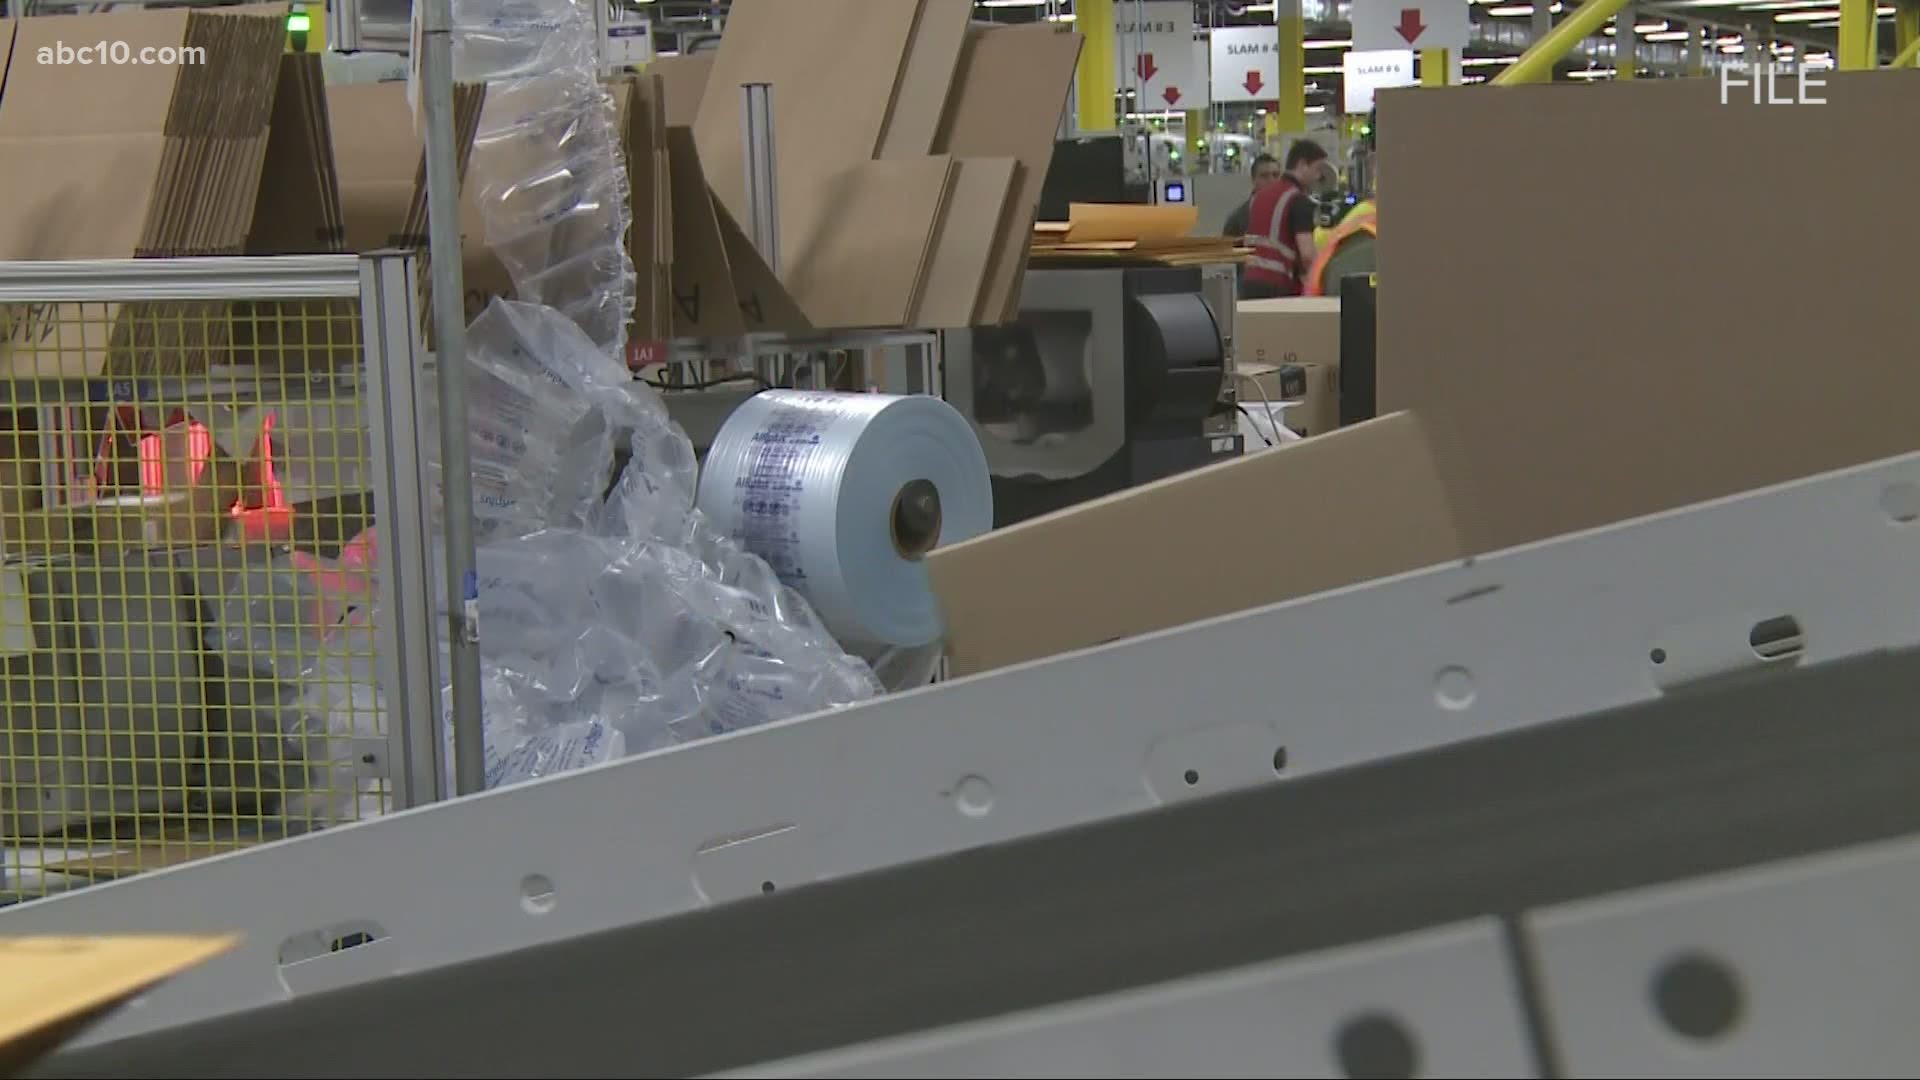 Based on the messages workers shared with ABC10, a Stockton Amazon facility has had at least seven workers test positive for coronavirus this month alone.